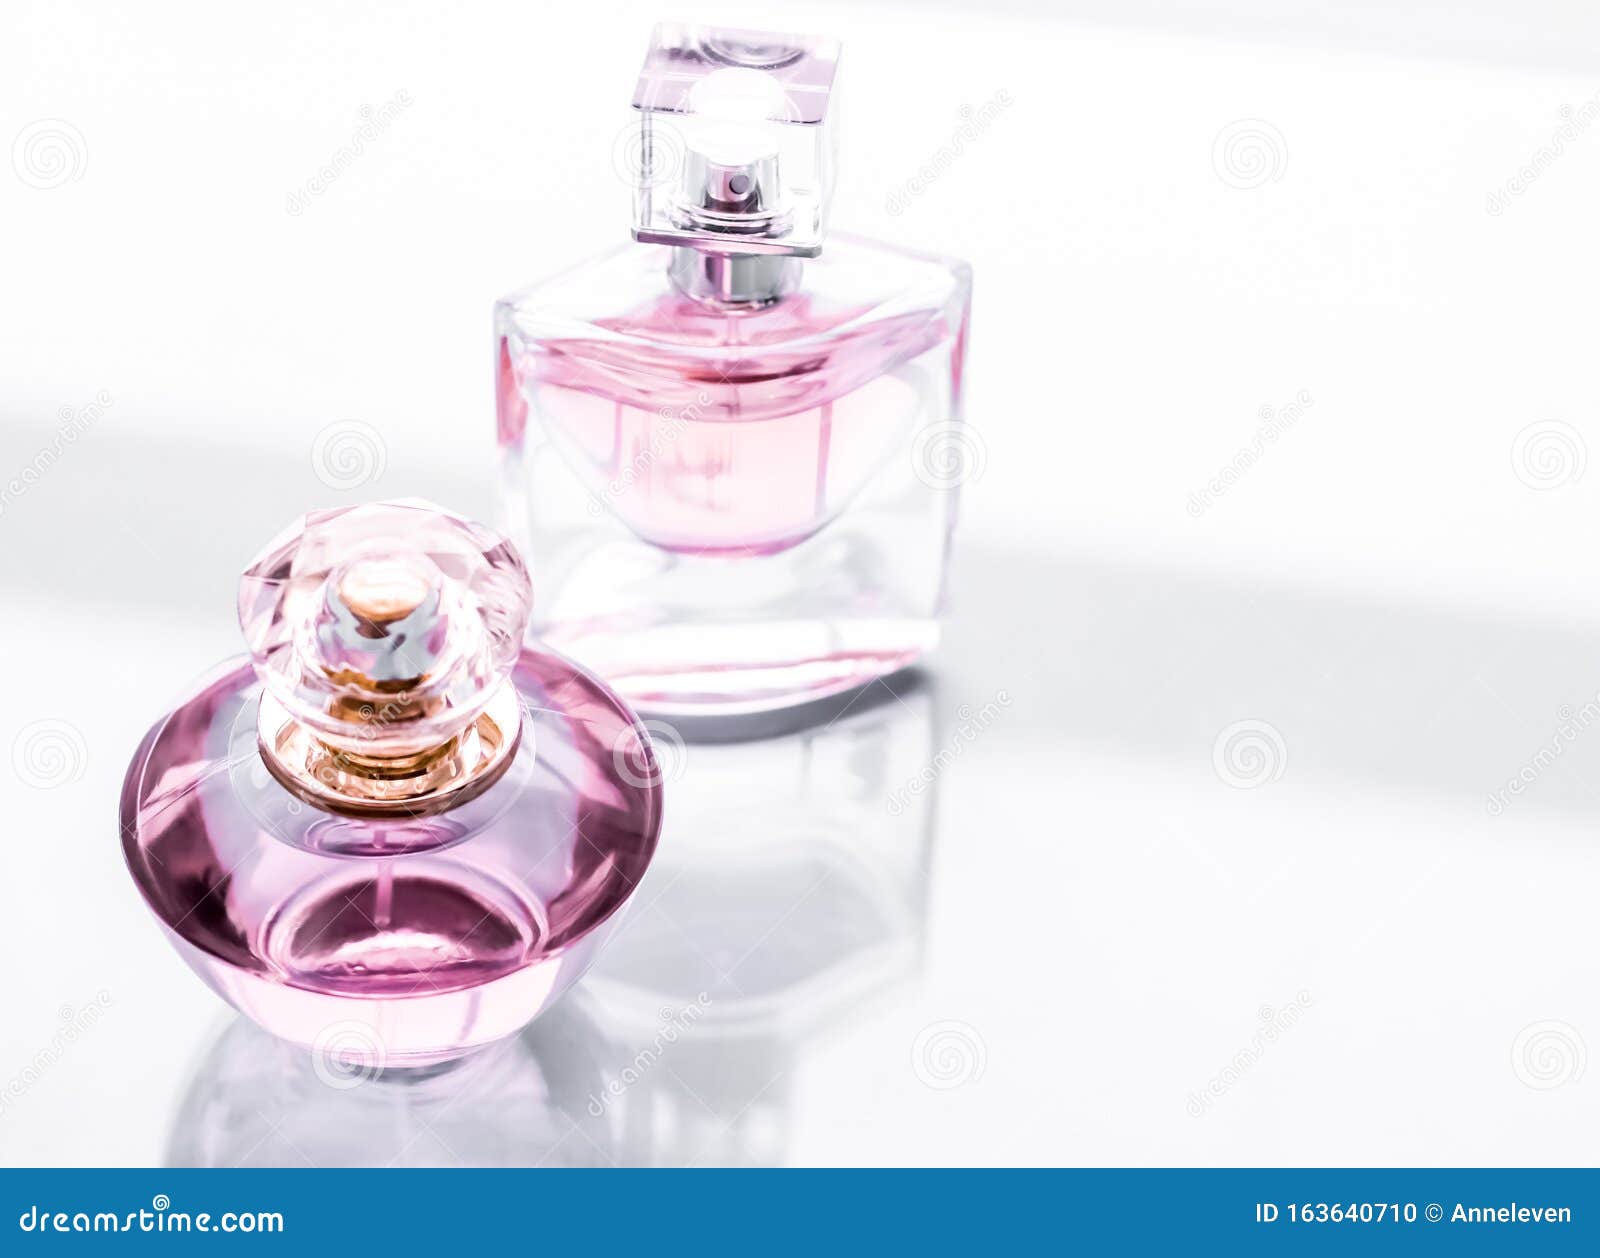 Pink perfume bottle on glossy background, sweet floral scent, glamour  fragrance and eau de parfum as holiday gift and luxury beauty cosmetics  brand design, Stock image